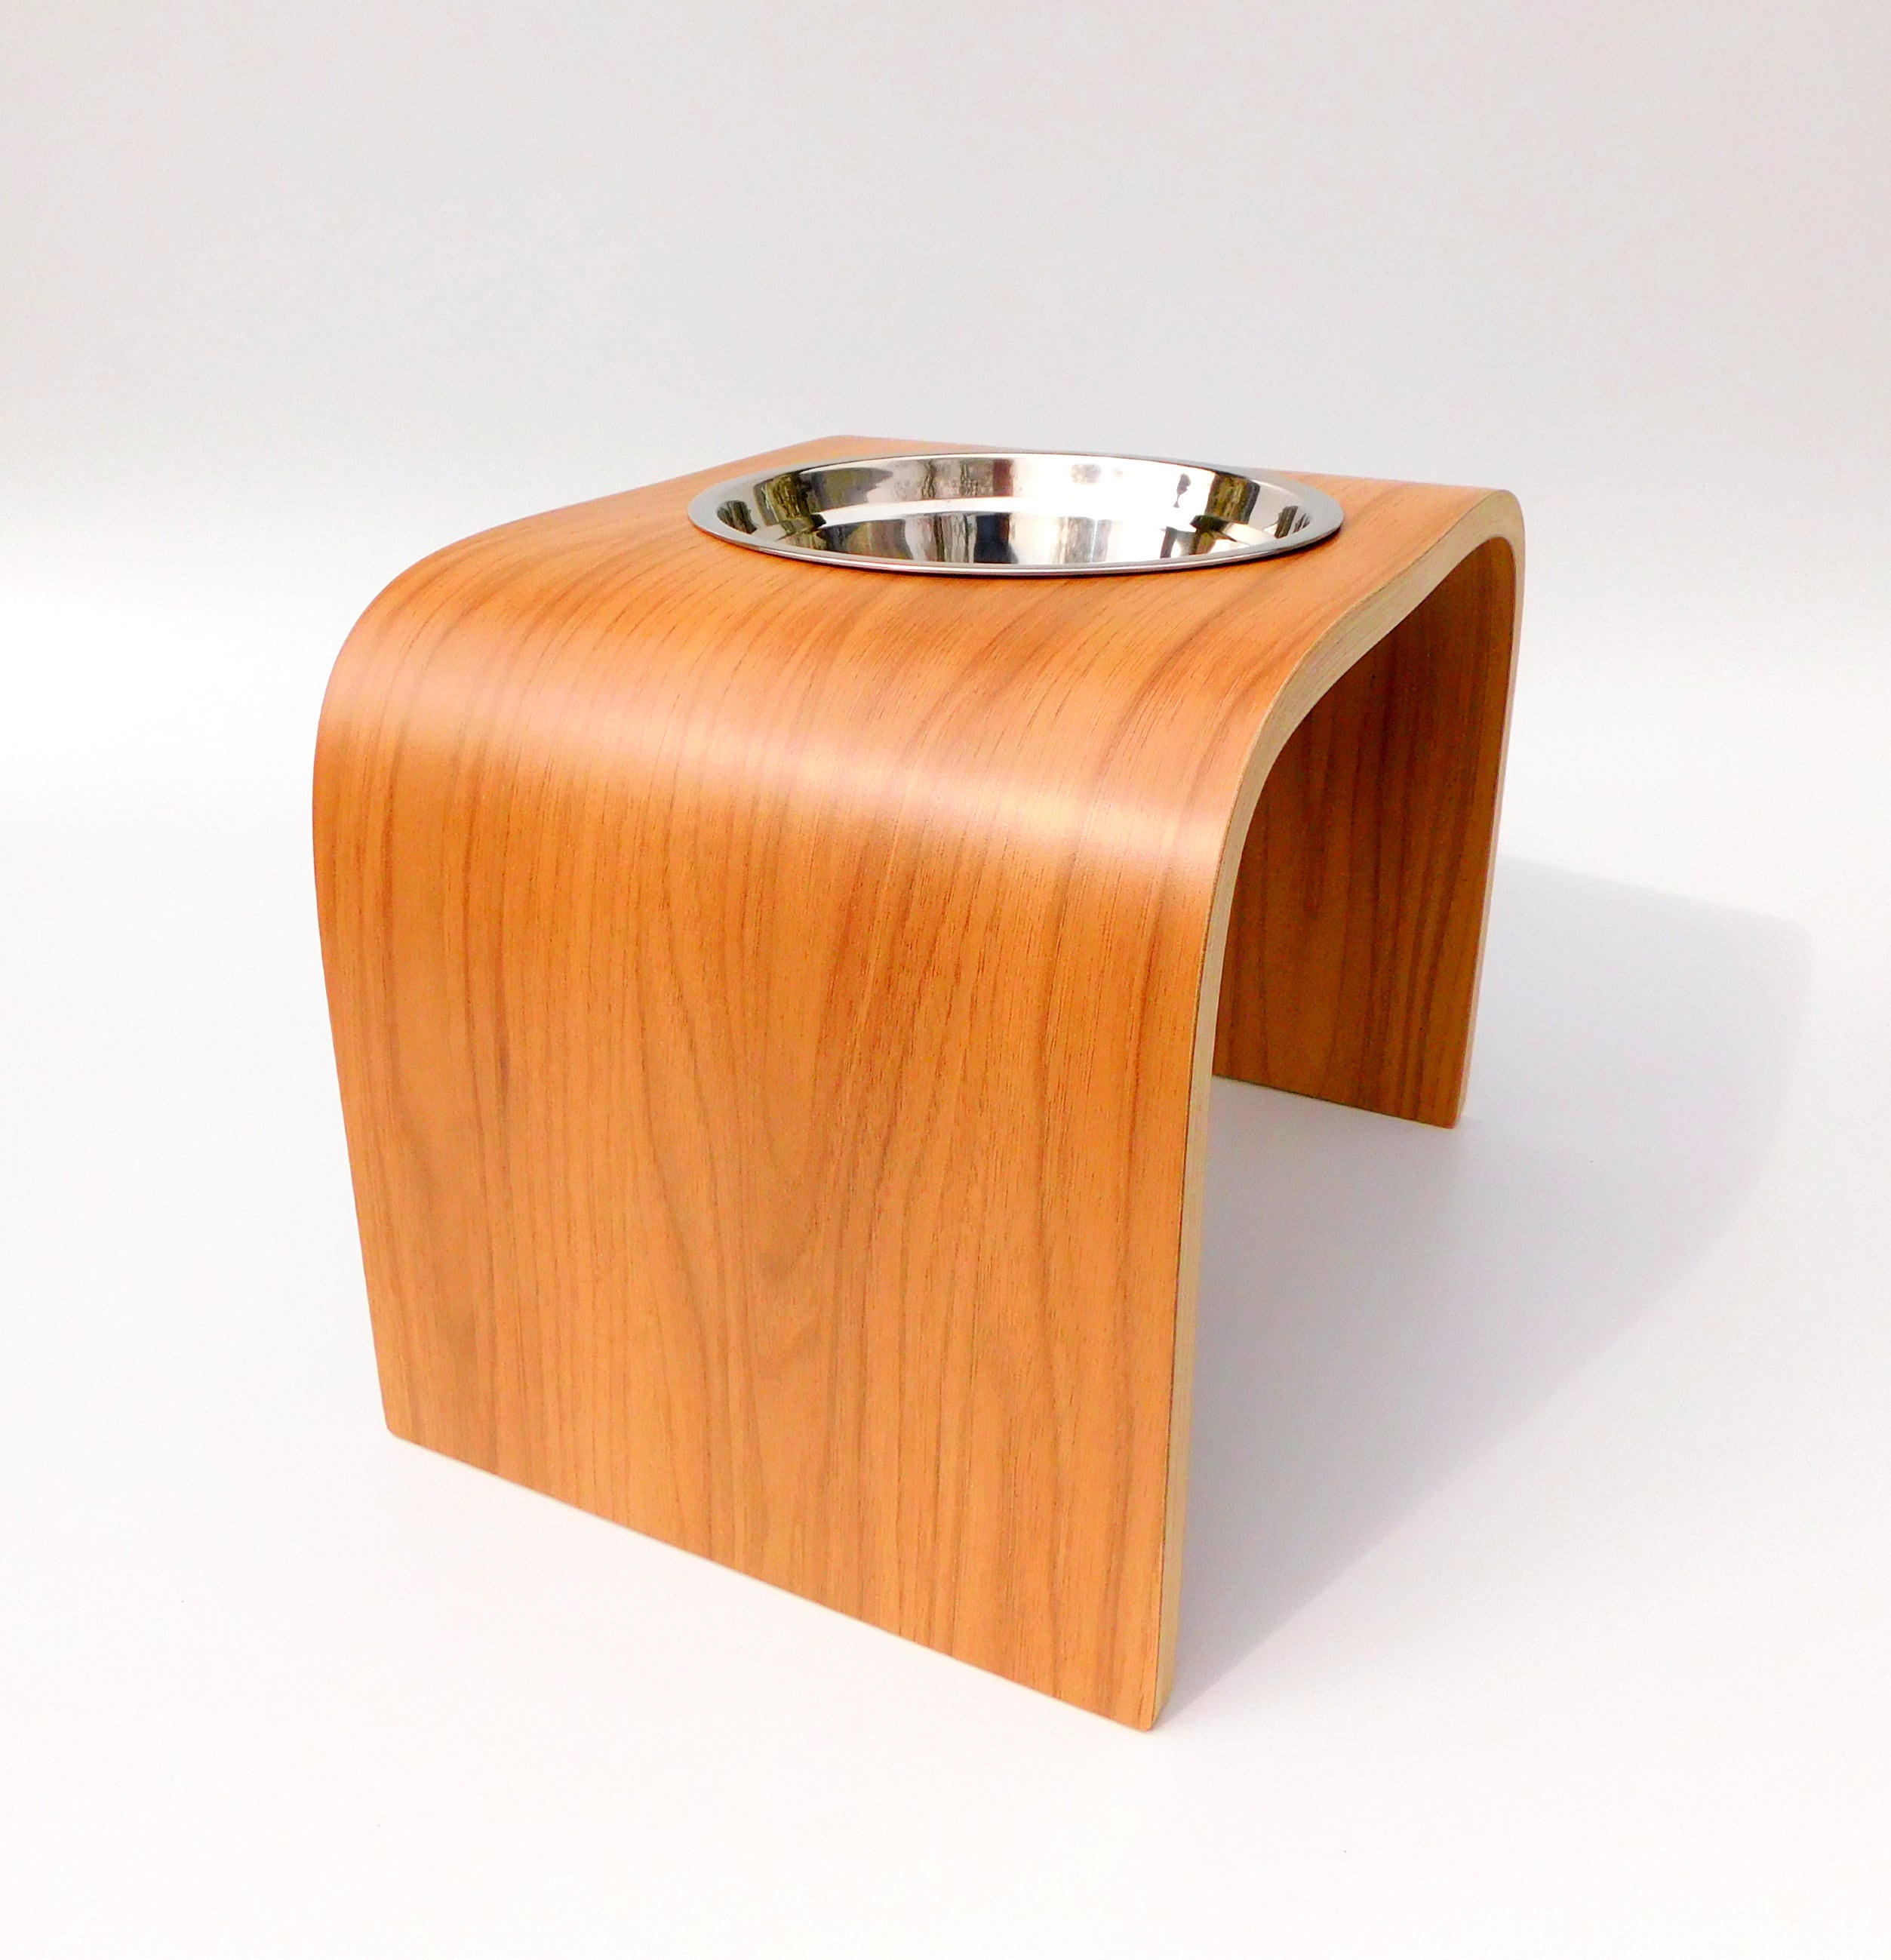 Single Raised Dog Bowl Stand, Dog Feeder Water Bowl Available in Various  Colours and Sizes 